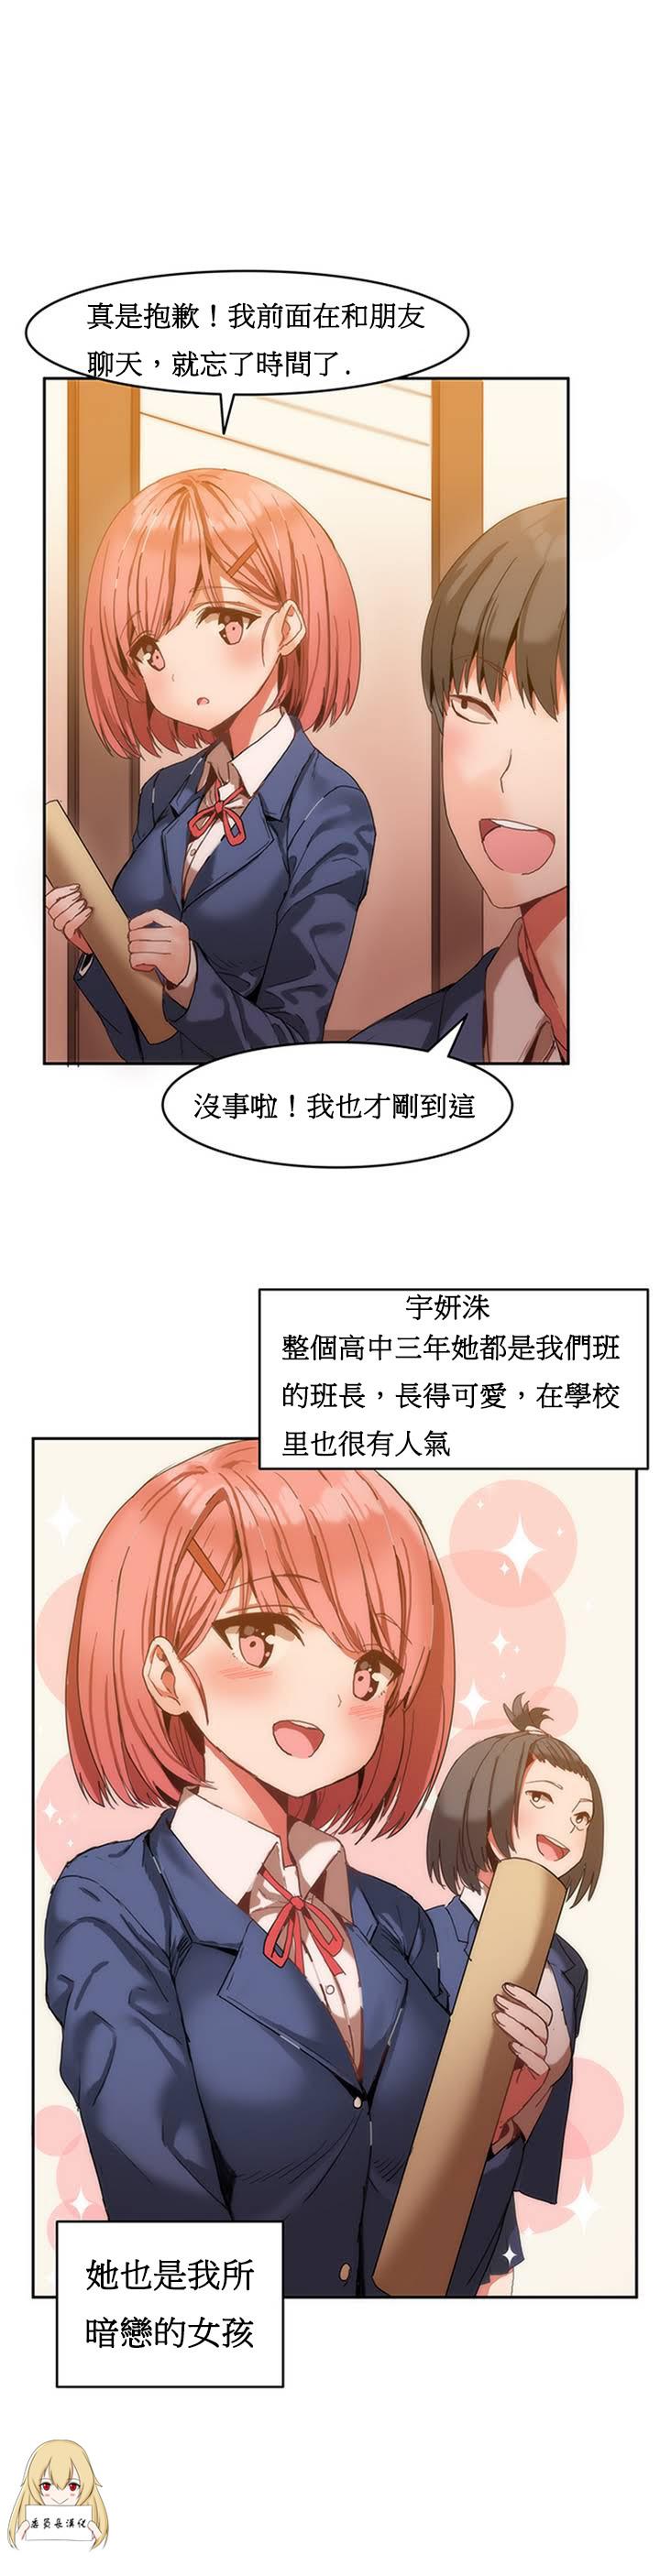 Butt Sex Hahri's Lumpy Boardhouse Ch. 1~18【委員長個人漢化】（持續更新） Banho - Page 5